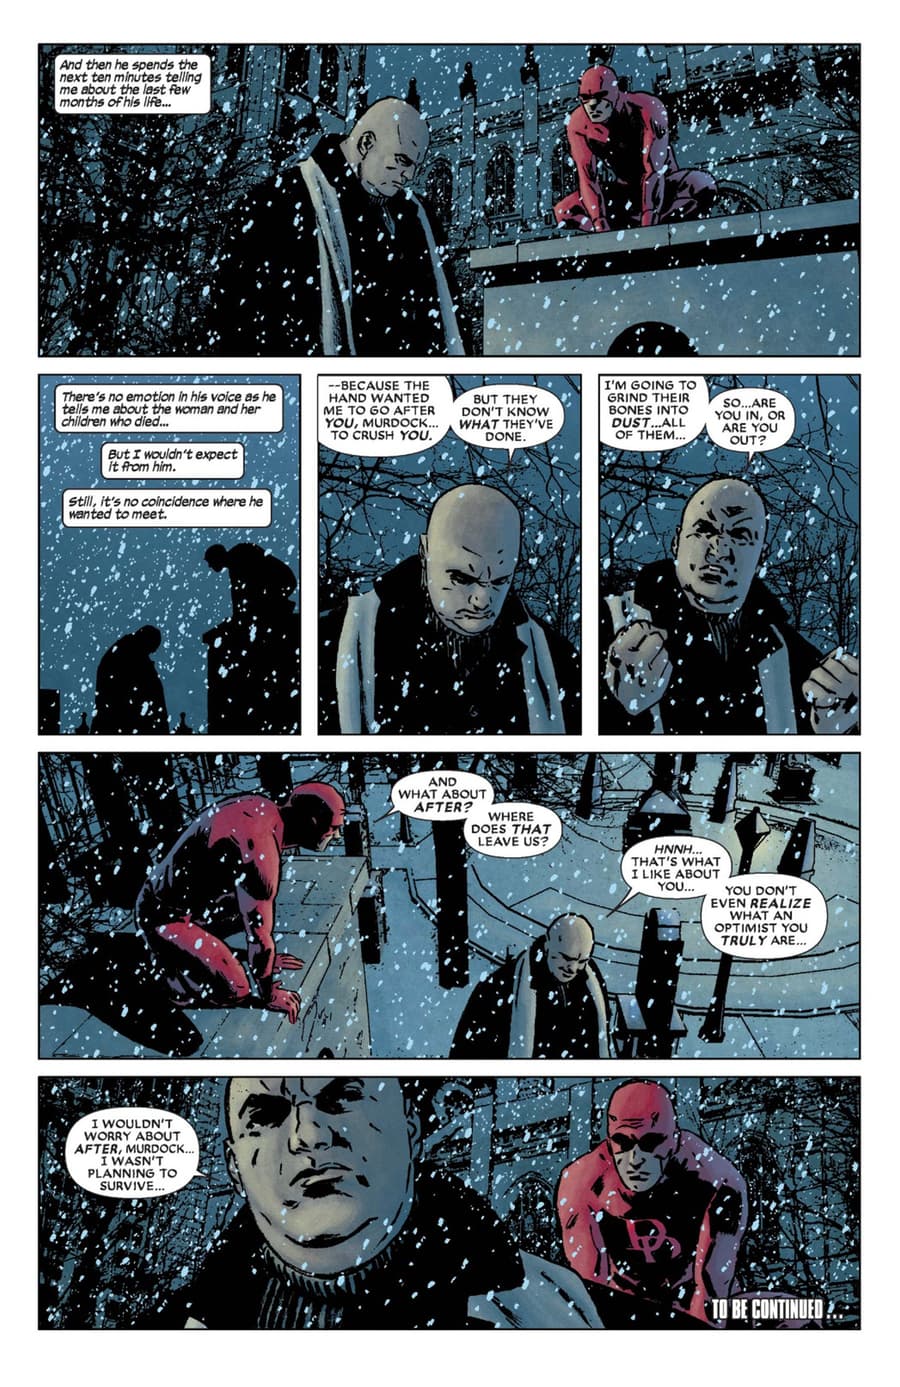 DAREDEVIL (1998) #117 page by Ed Brubaker, Michael Lark, and Stefano Gaudiano